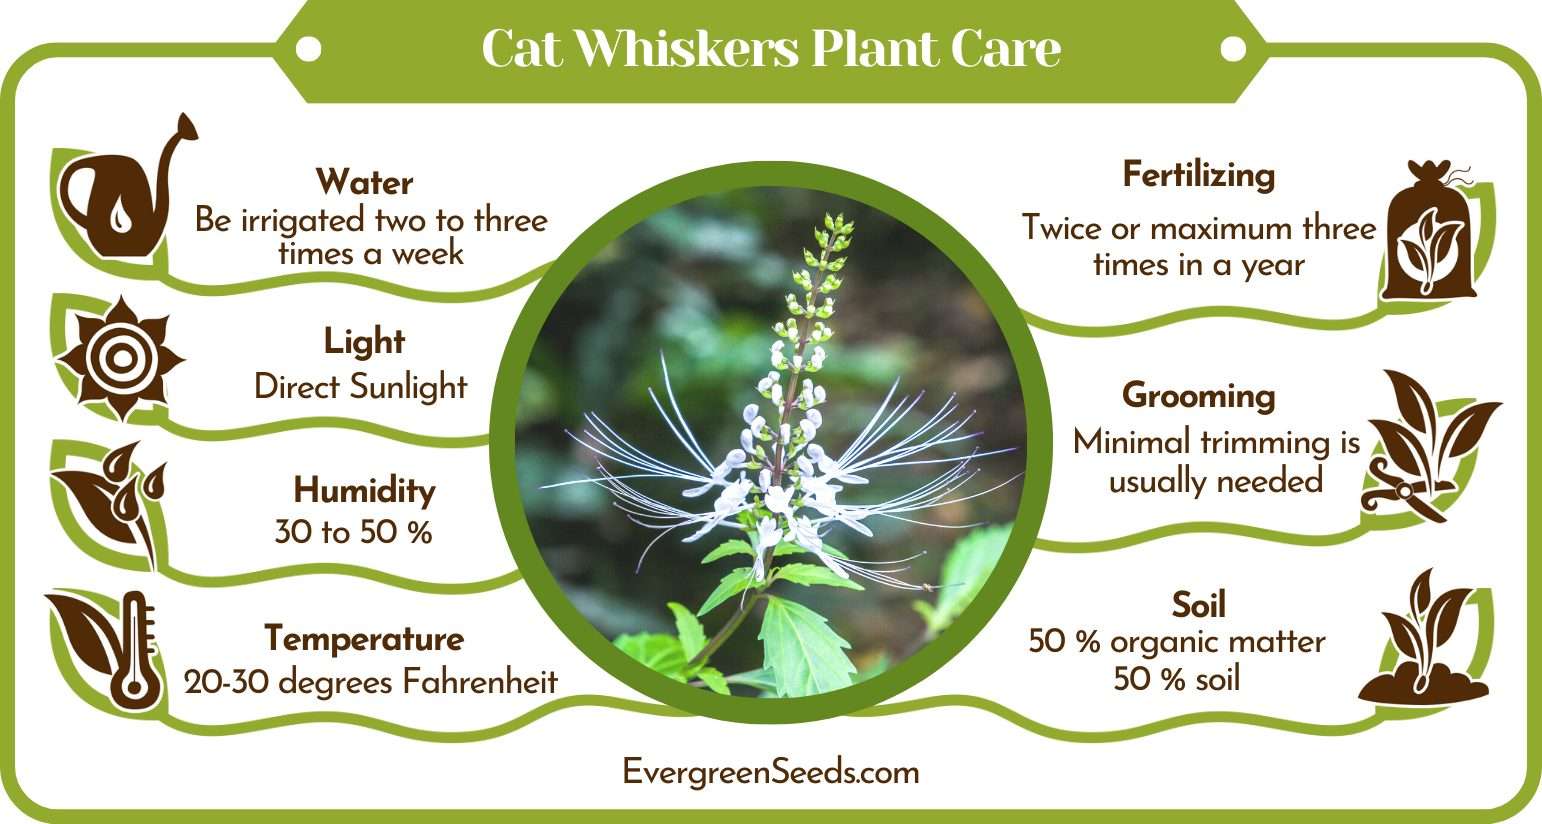 Cat Whiskers Plant Care